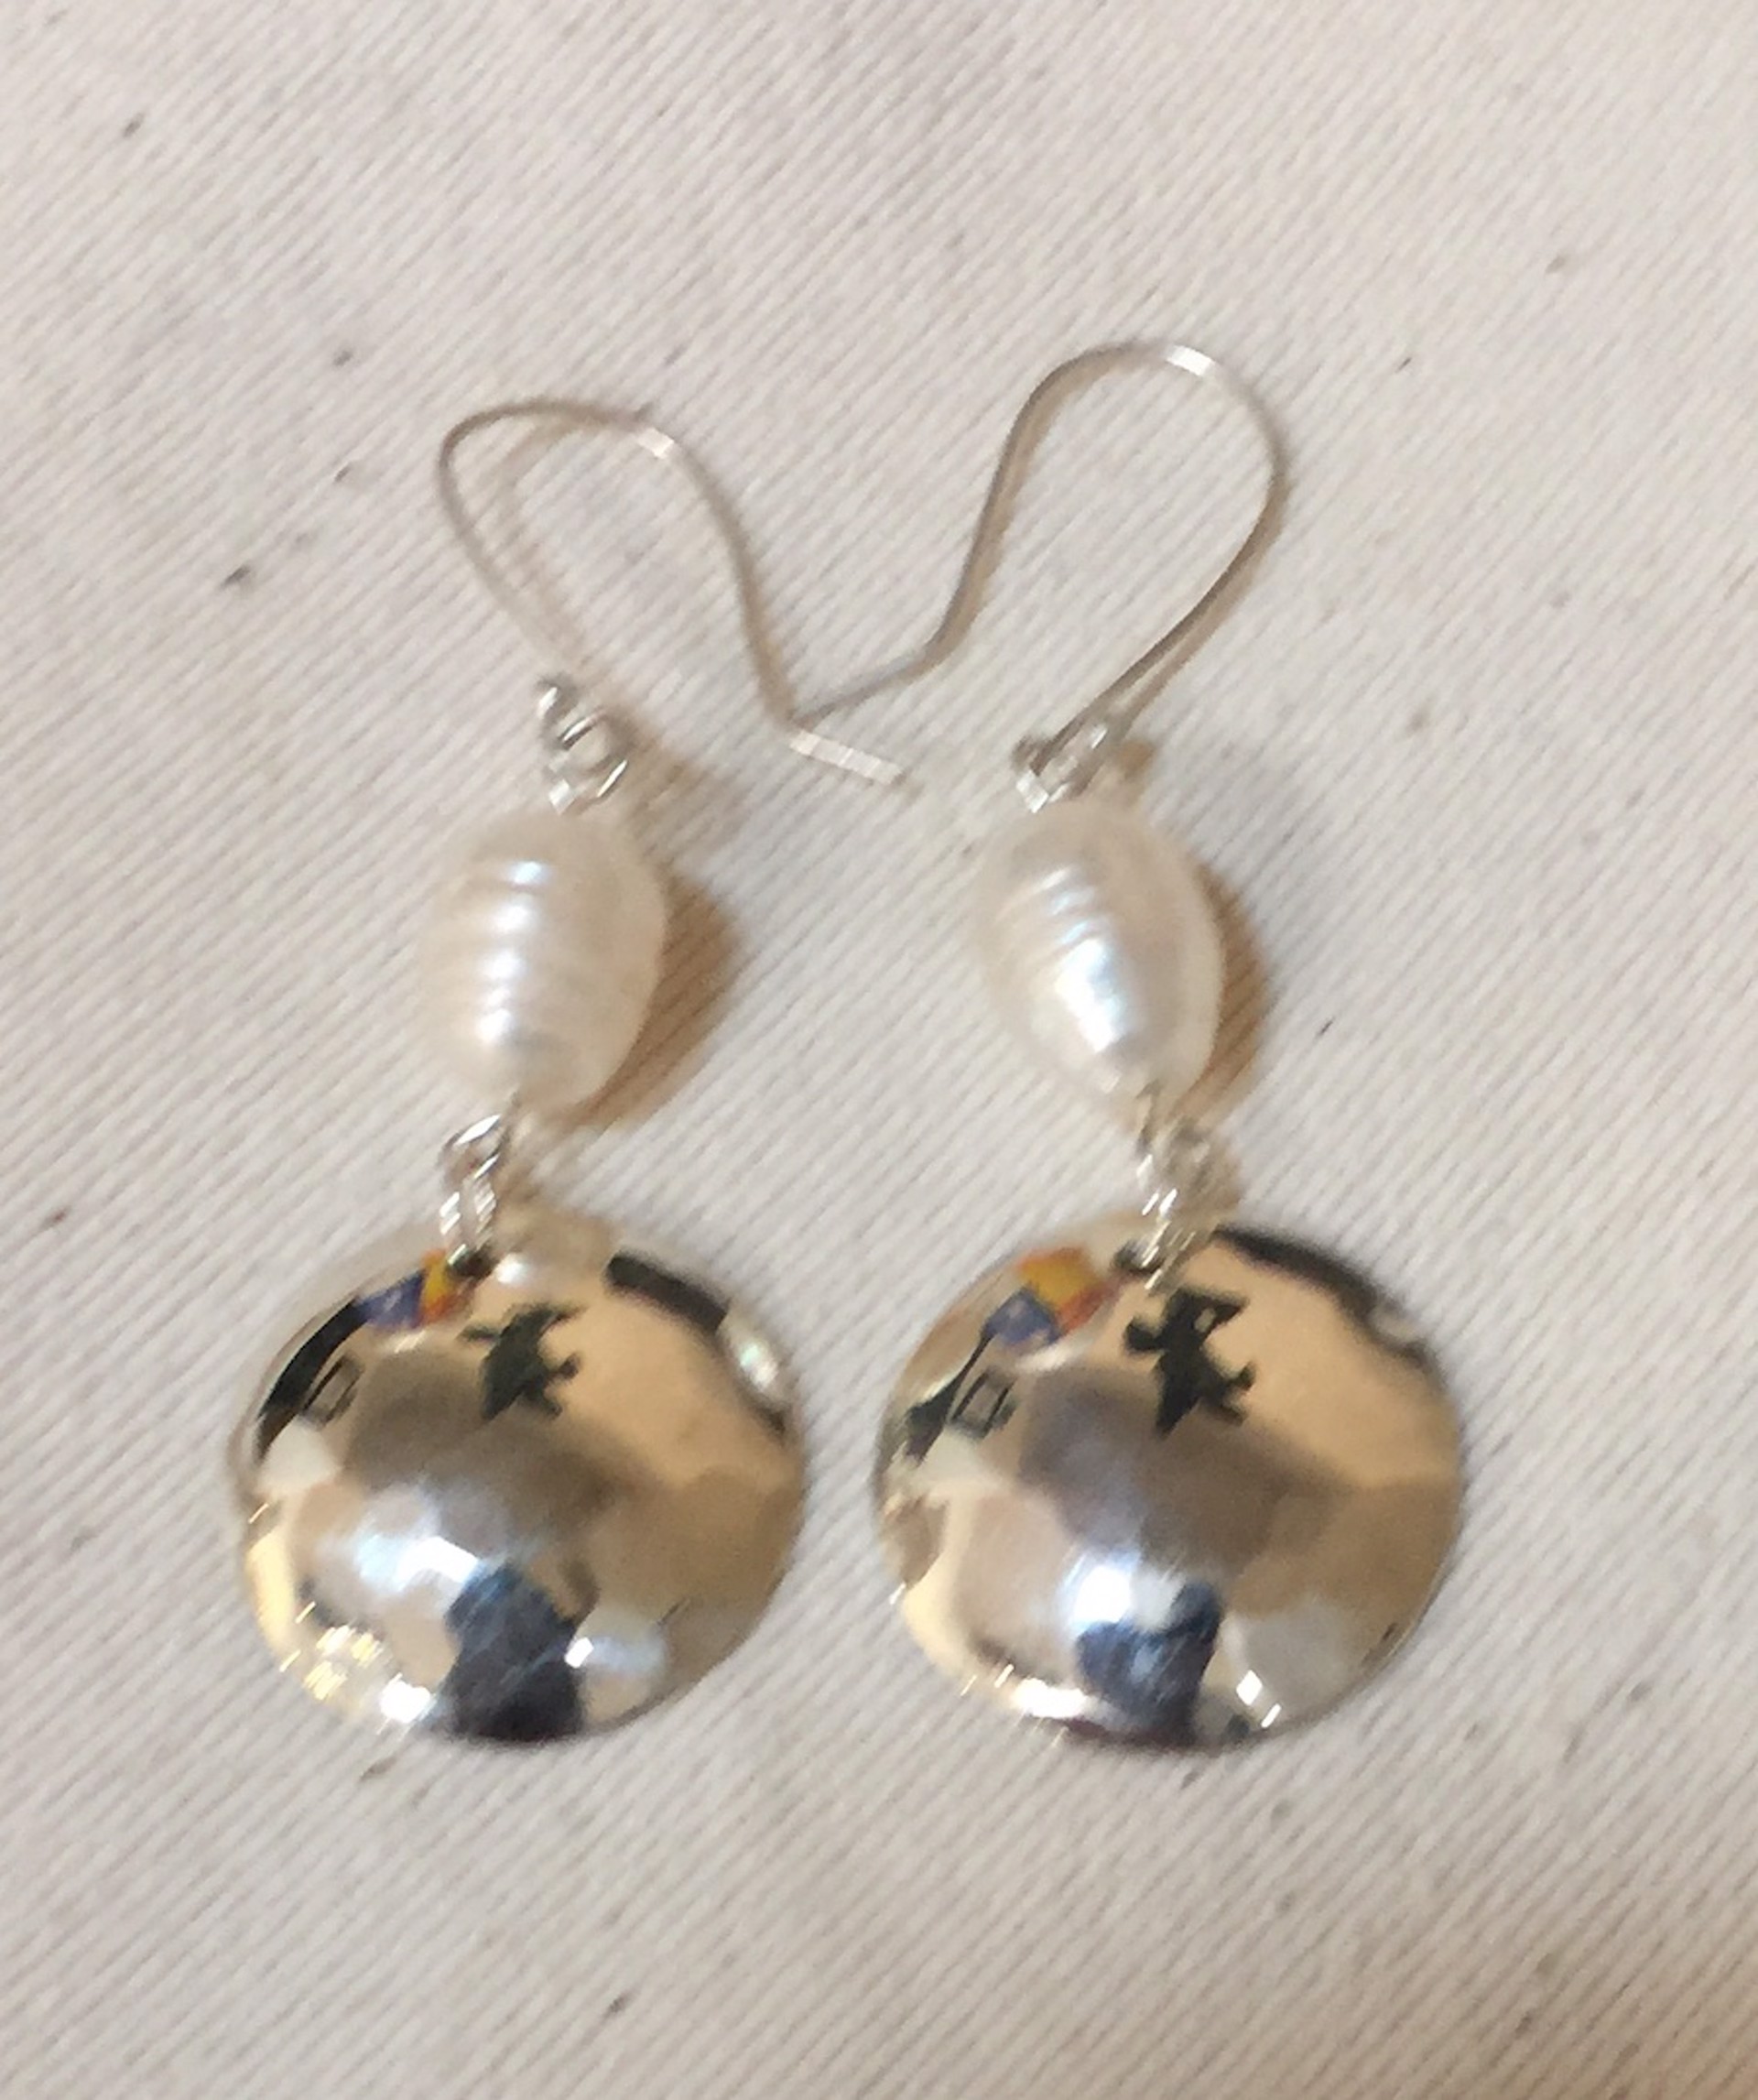 Earrings - Sterling Silver Disc With Pearl  #1014 by Vesta Abel